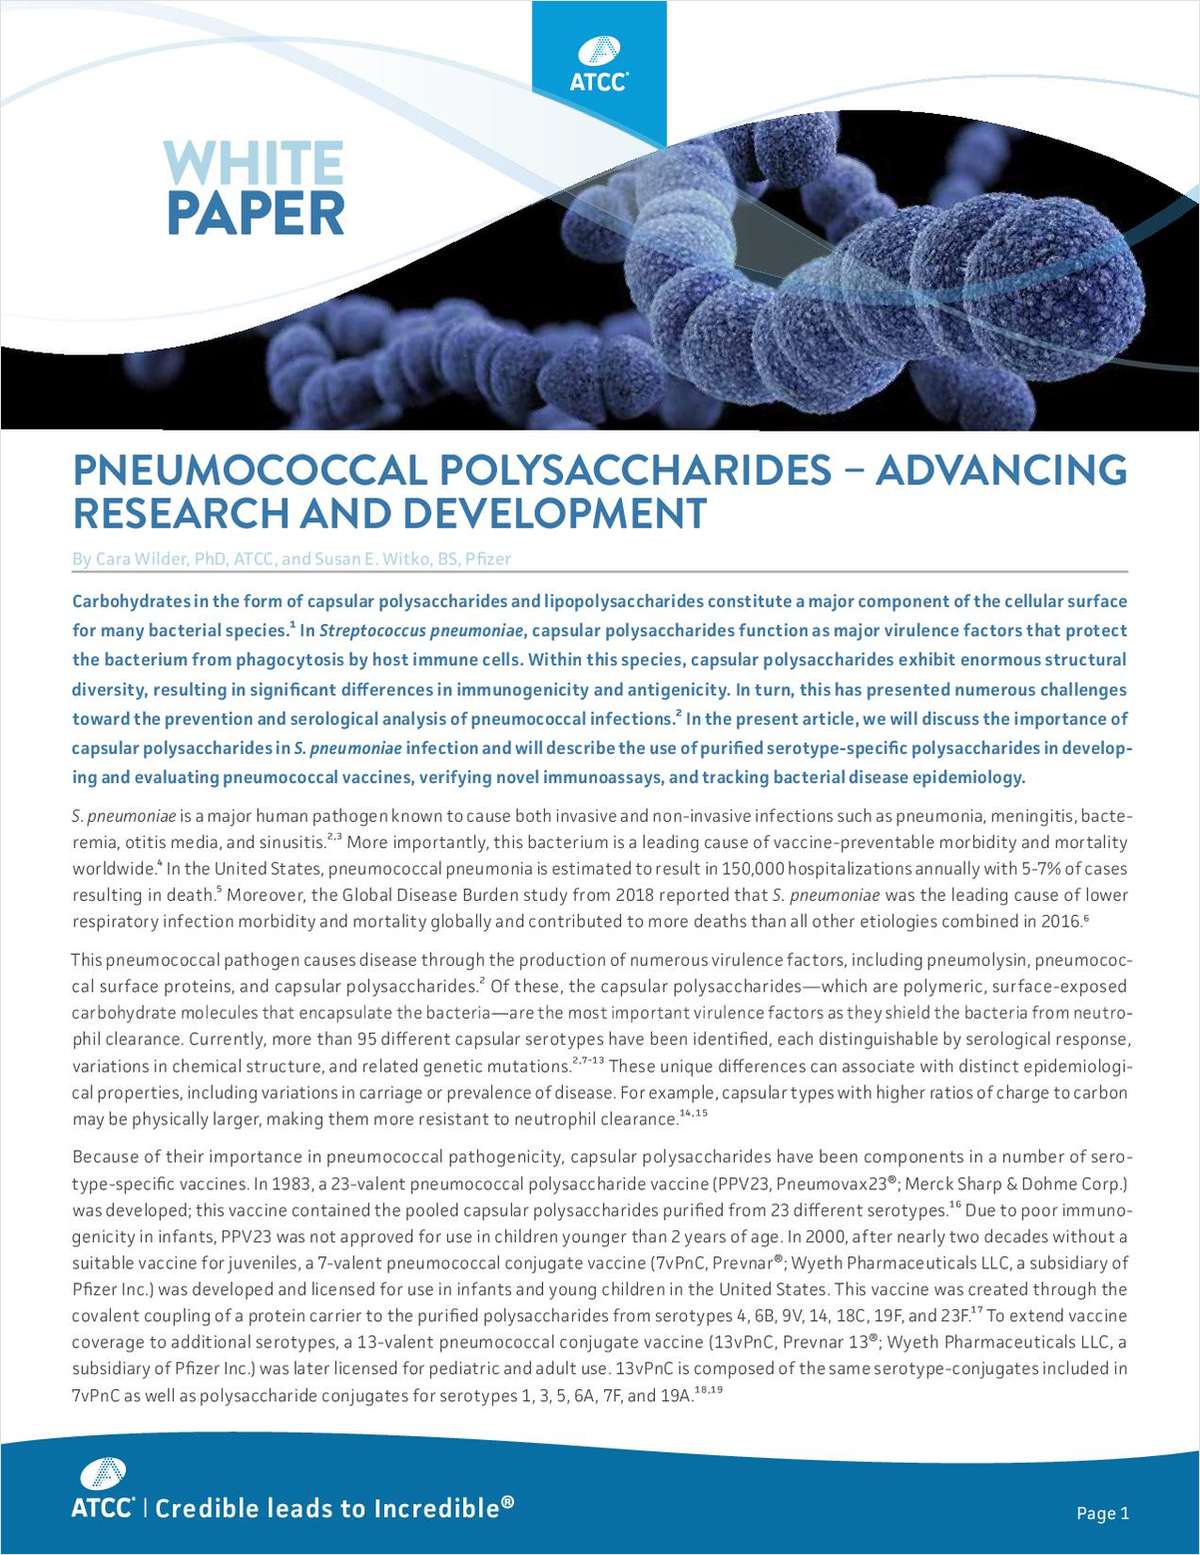 Pneumococcal Polysaccharides: Advancing Research and Development